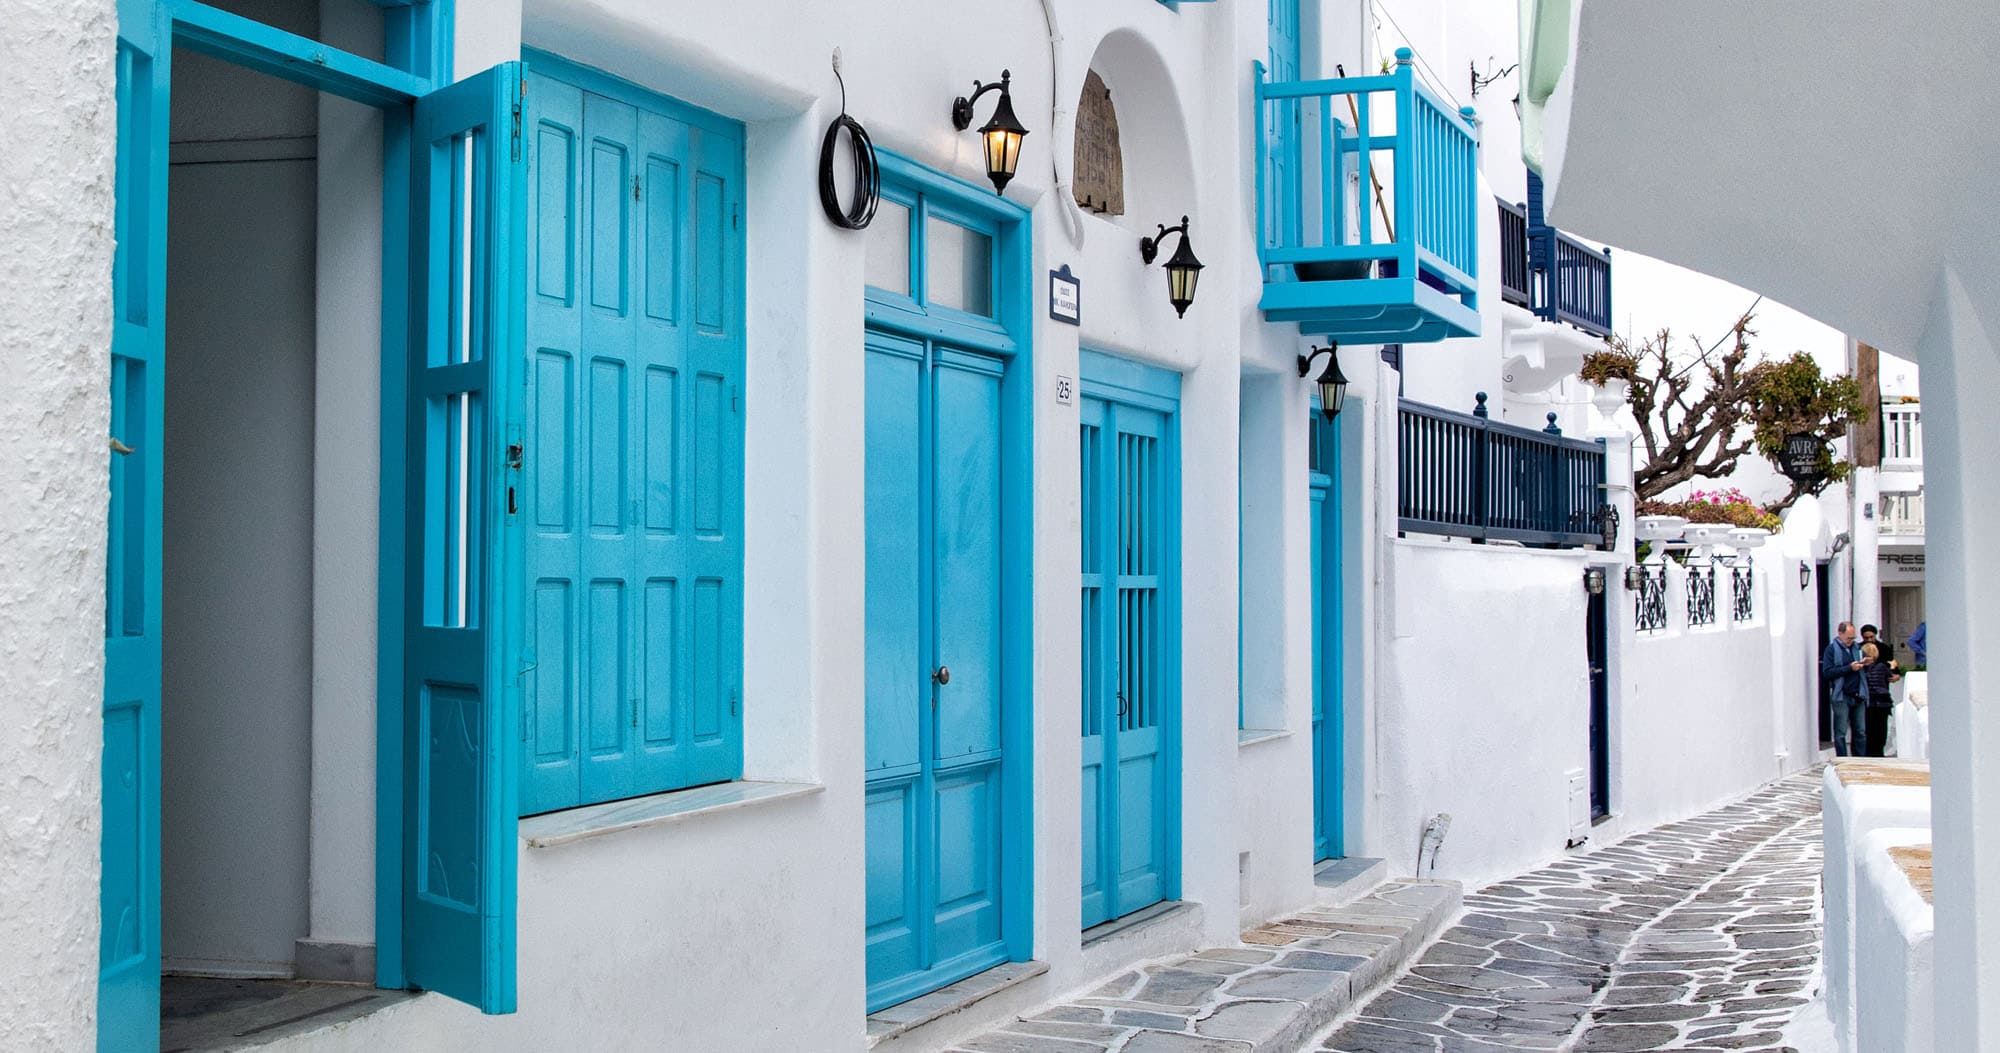 Things to Do in Mykonos